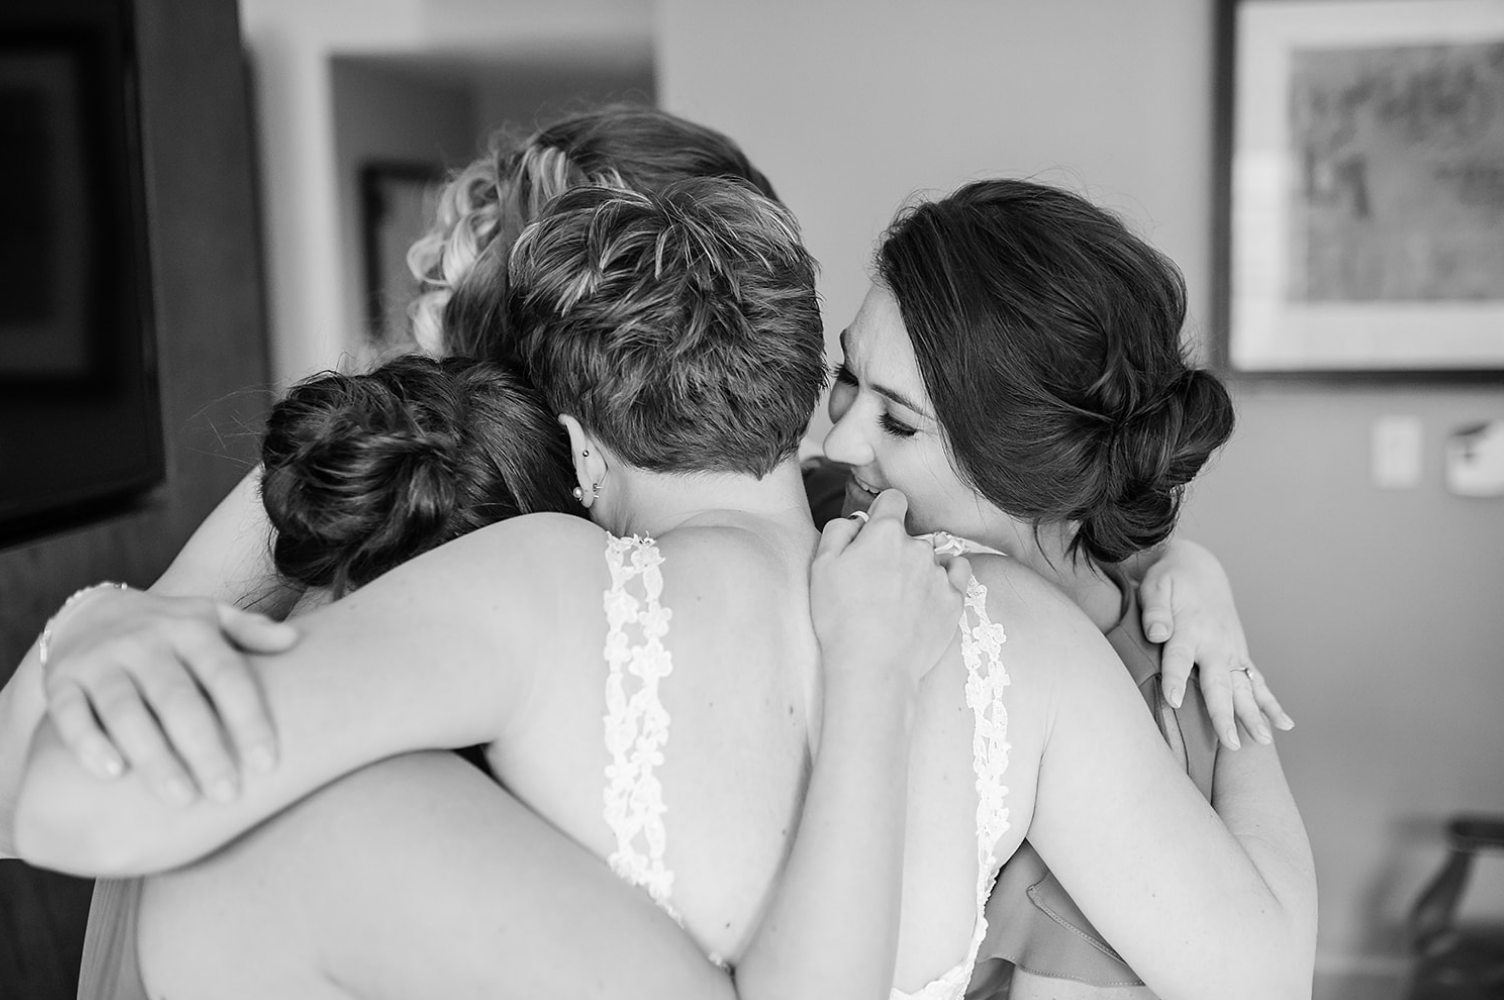 The bride hugs two of her bridesmaids before the whimsical jewel-toned wedding.